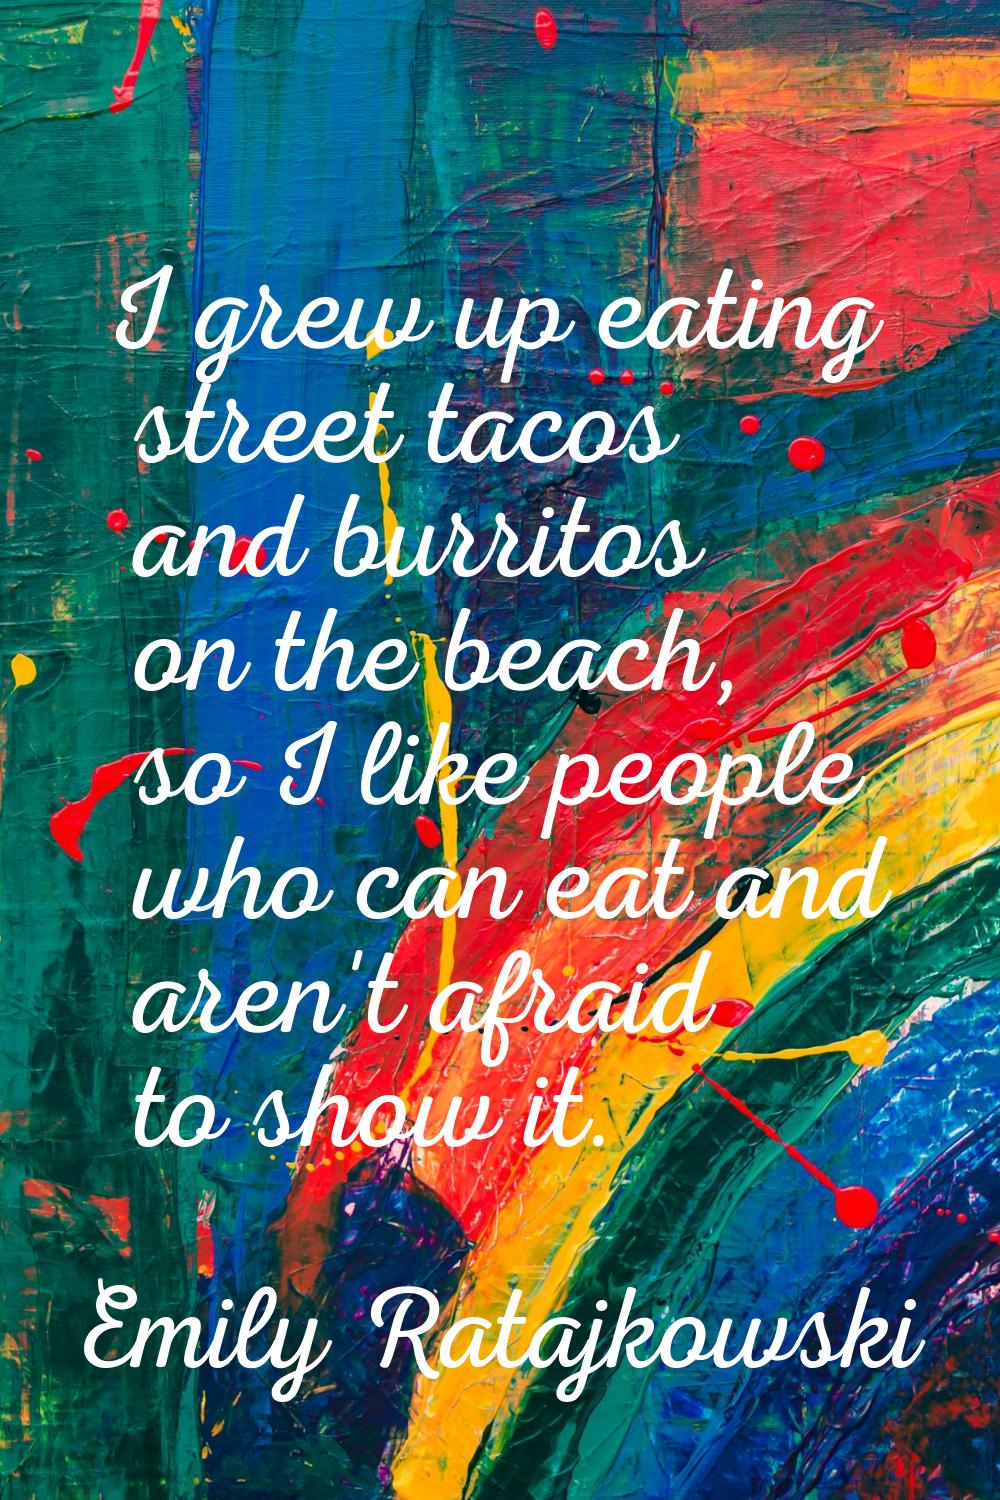 I grew up eating street tacos and burritos on the beach, so I like people who can eat and aren't af